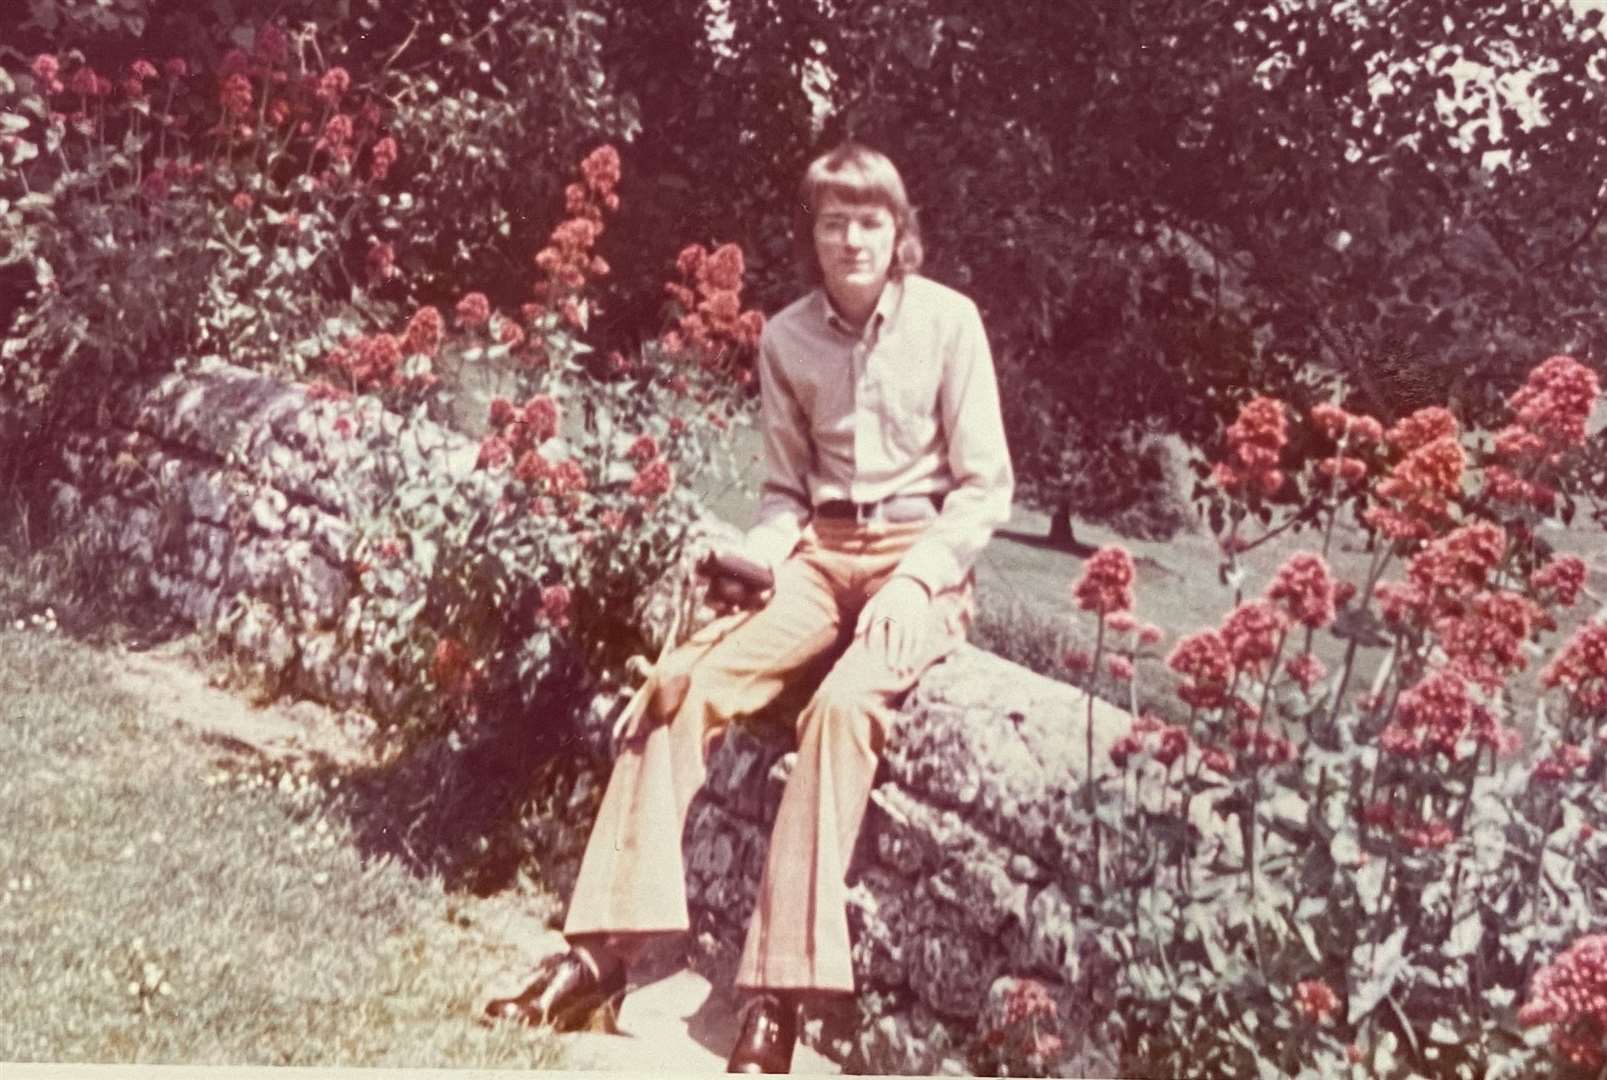 Ron when he was 16 years old - photo was taken in 1970